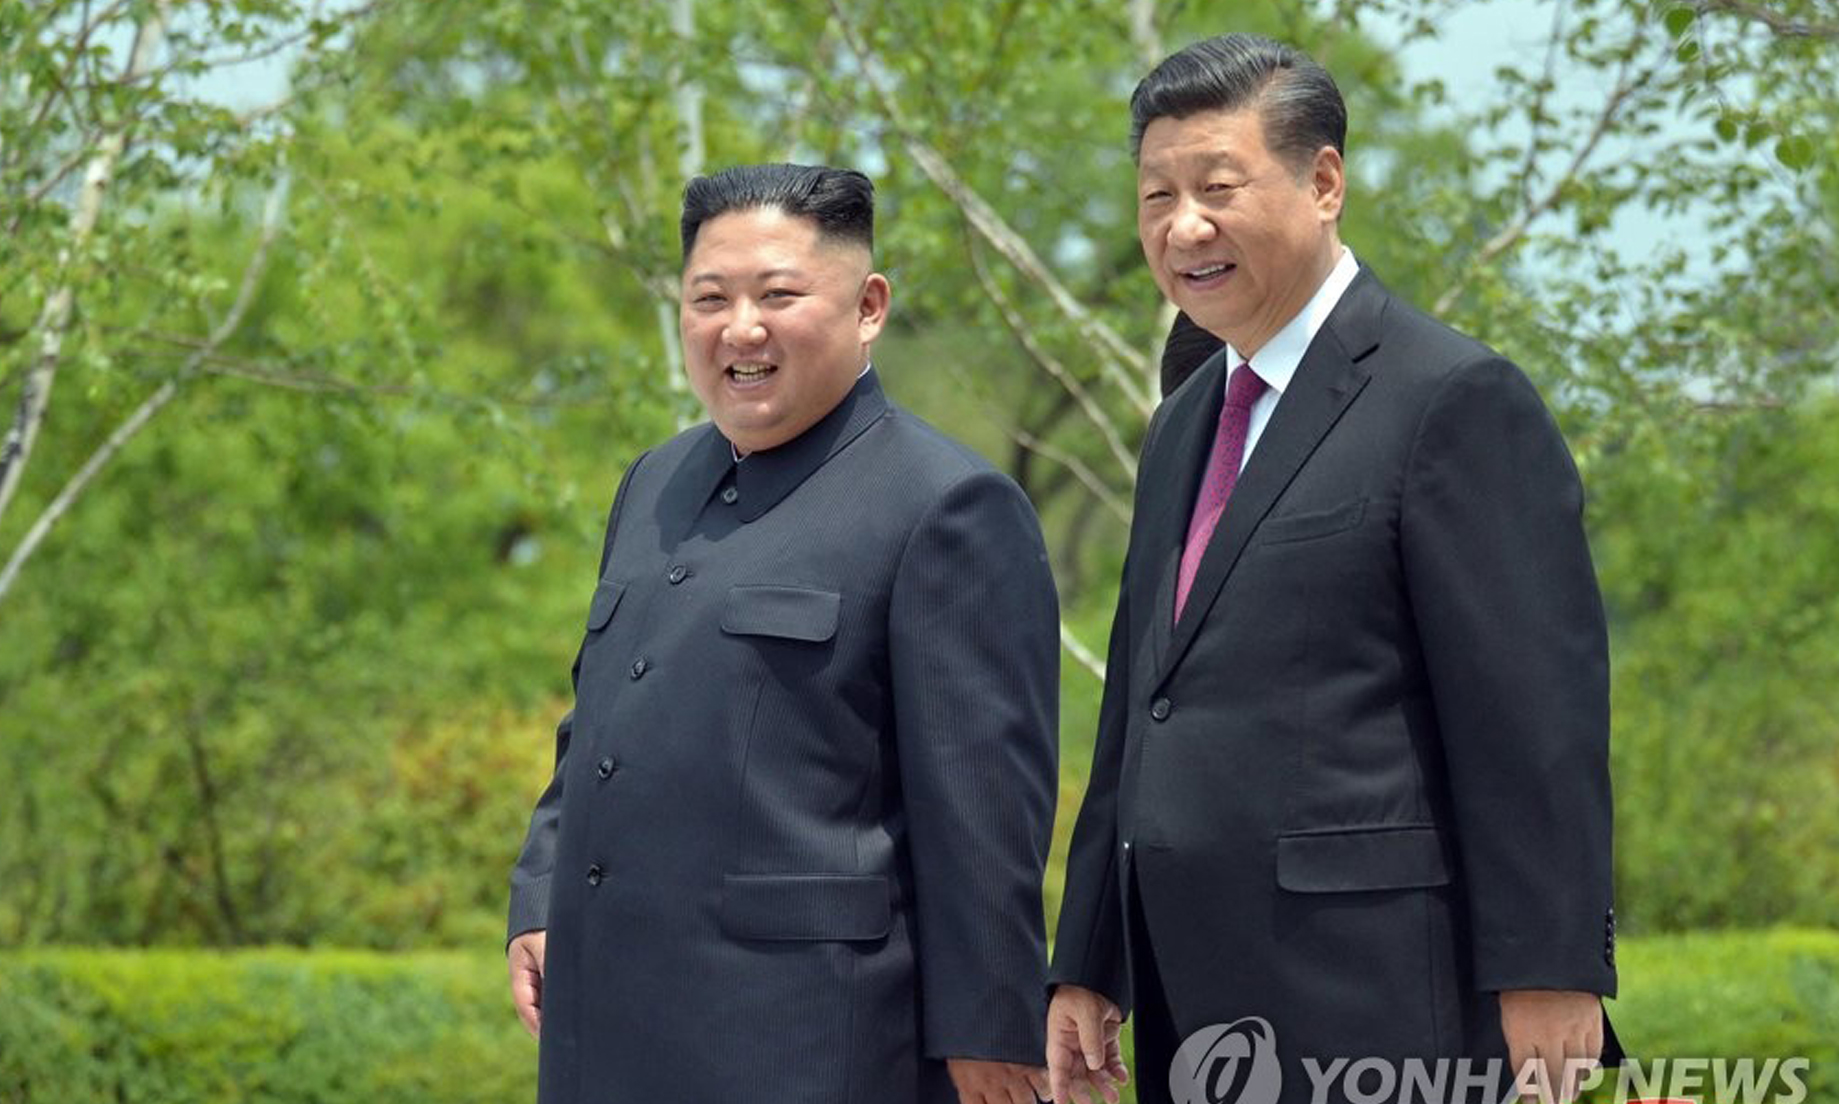 Kim, Xi reach consensus on ‘important issues’ through series of summits